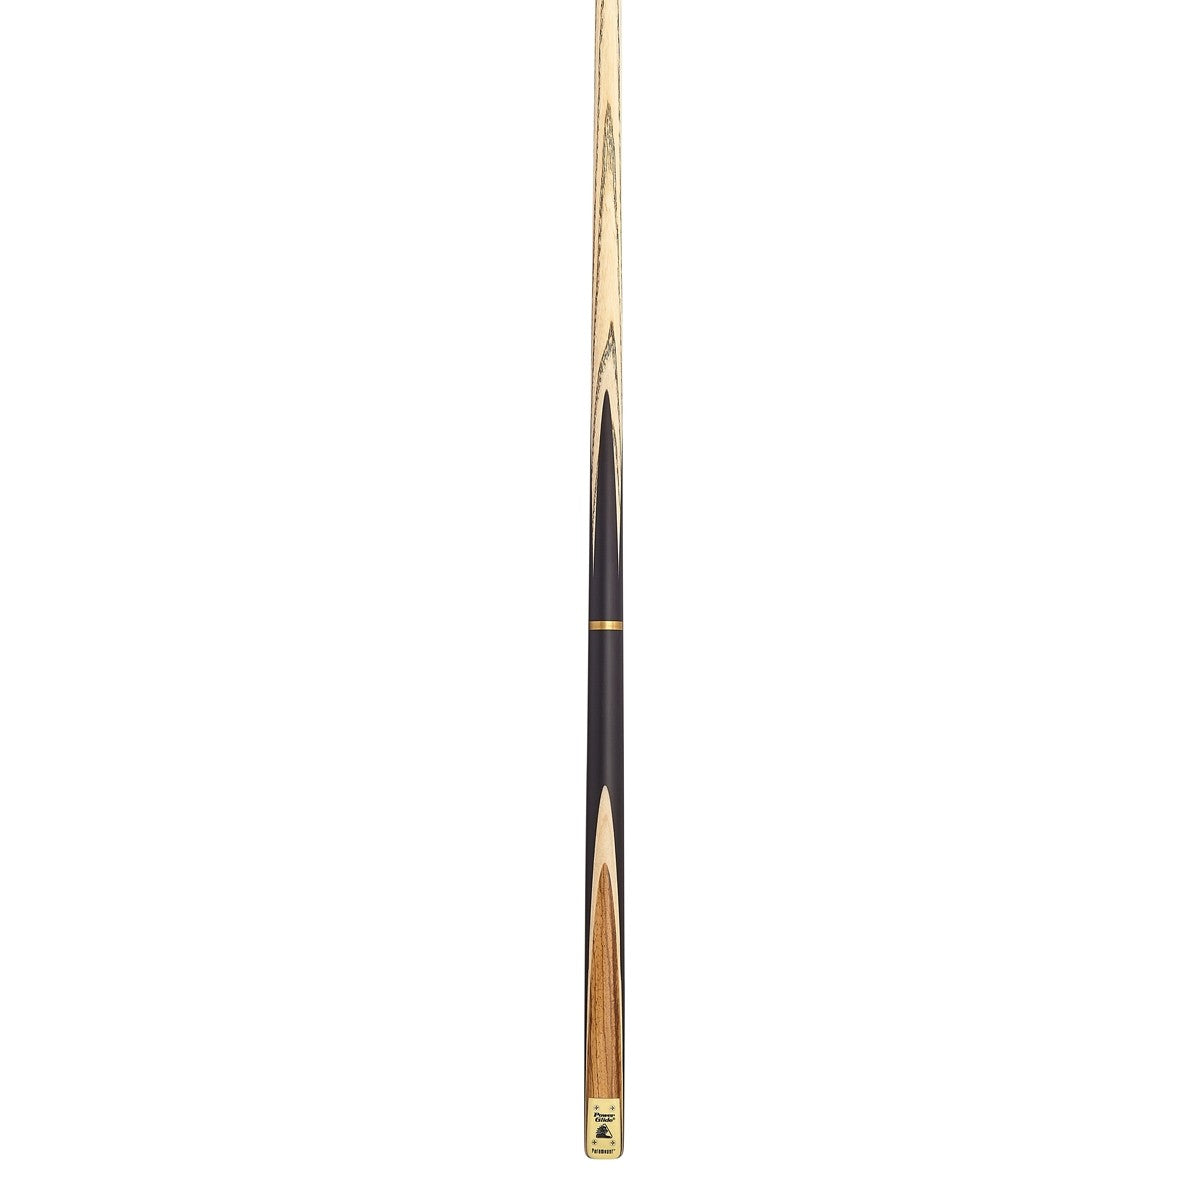 Powerglide Paramount 3/4 Joint Snooker Cue